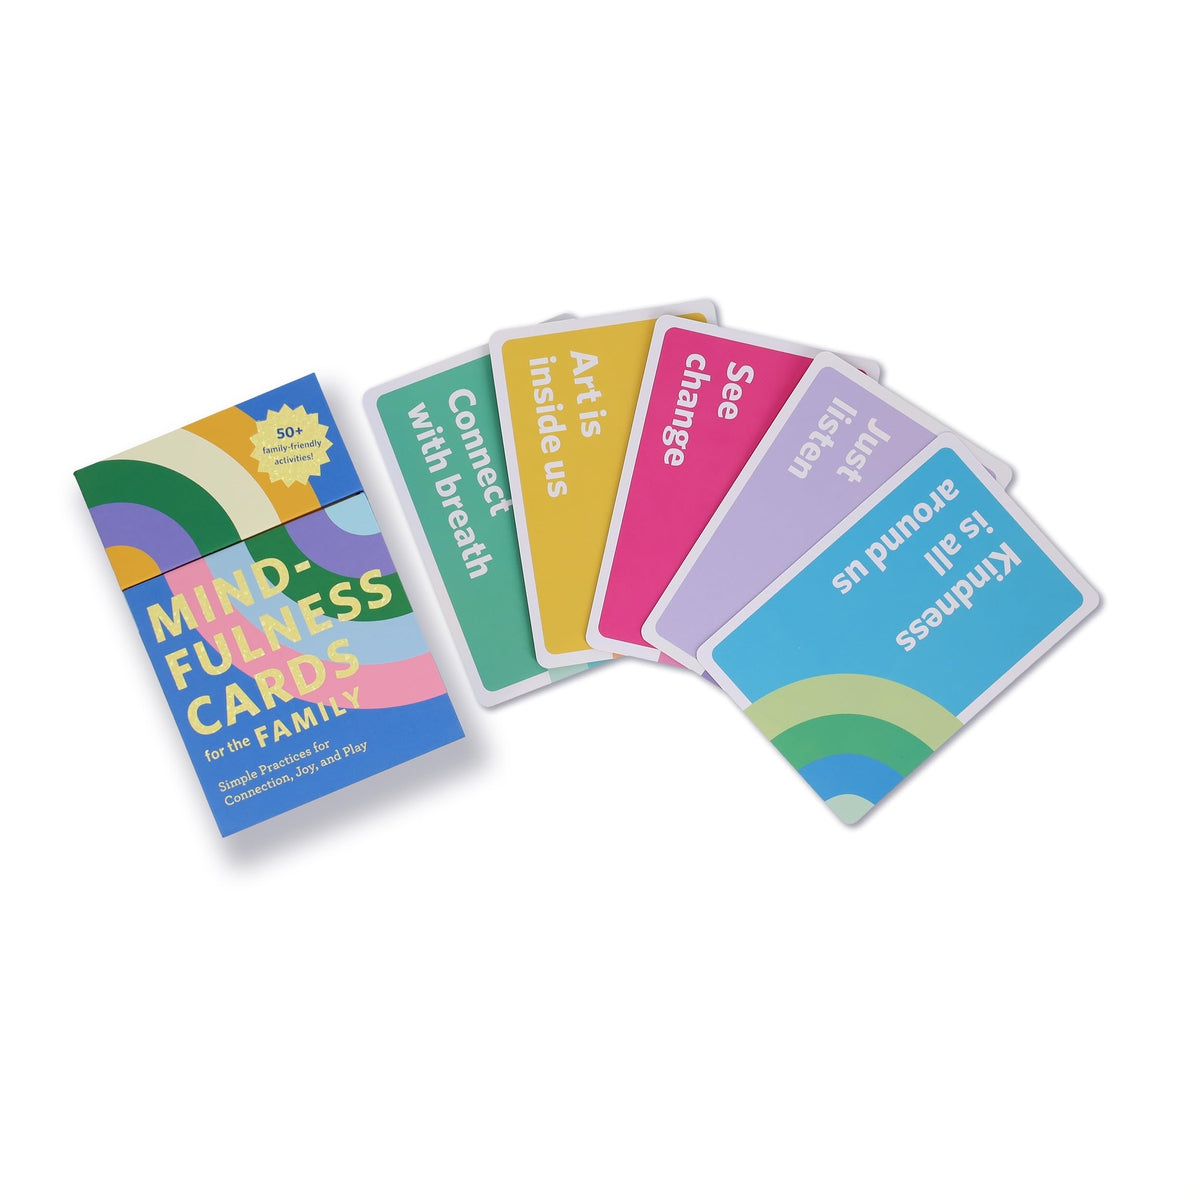 Mindfulness Cards for the Family – Chronicle Books